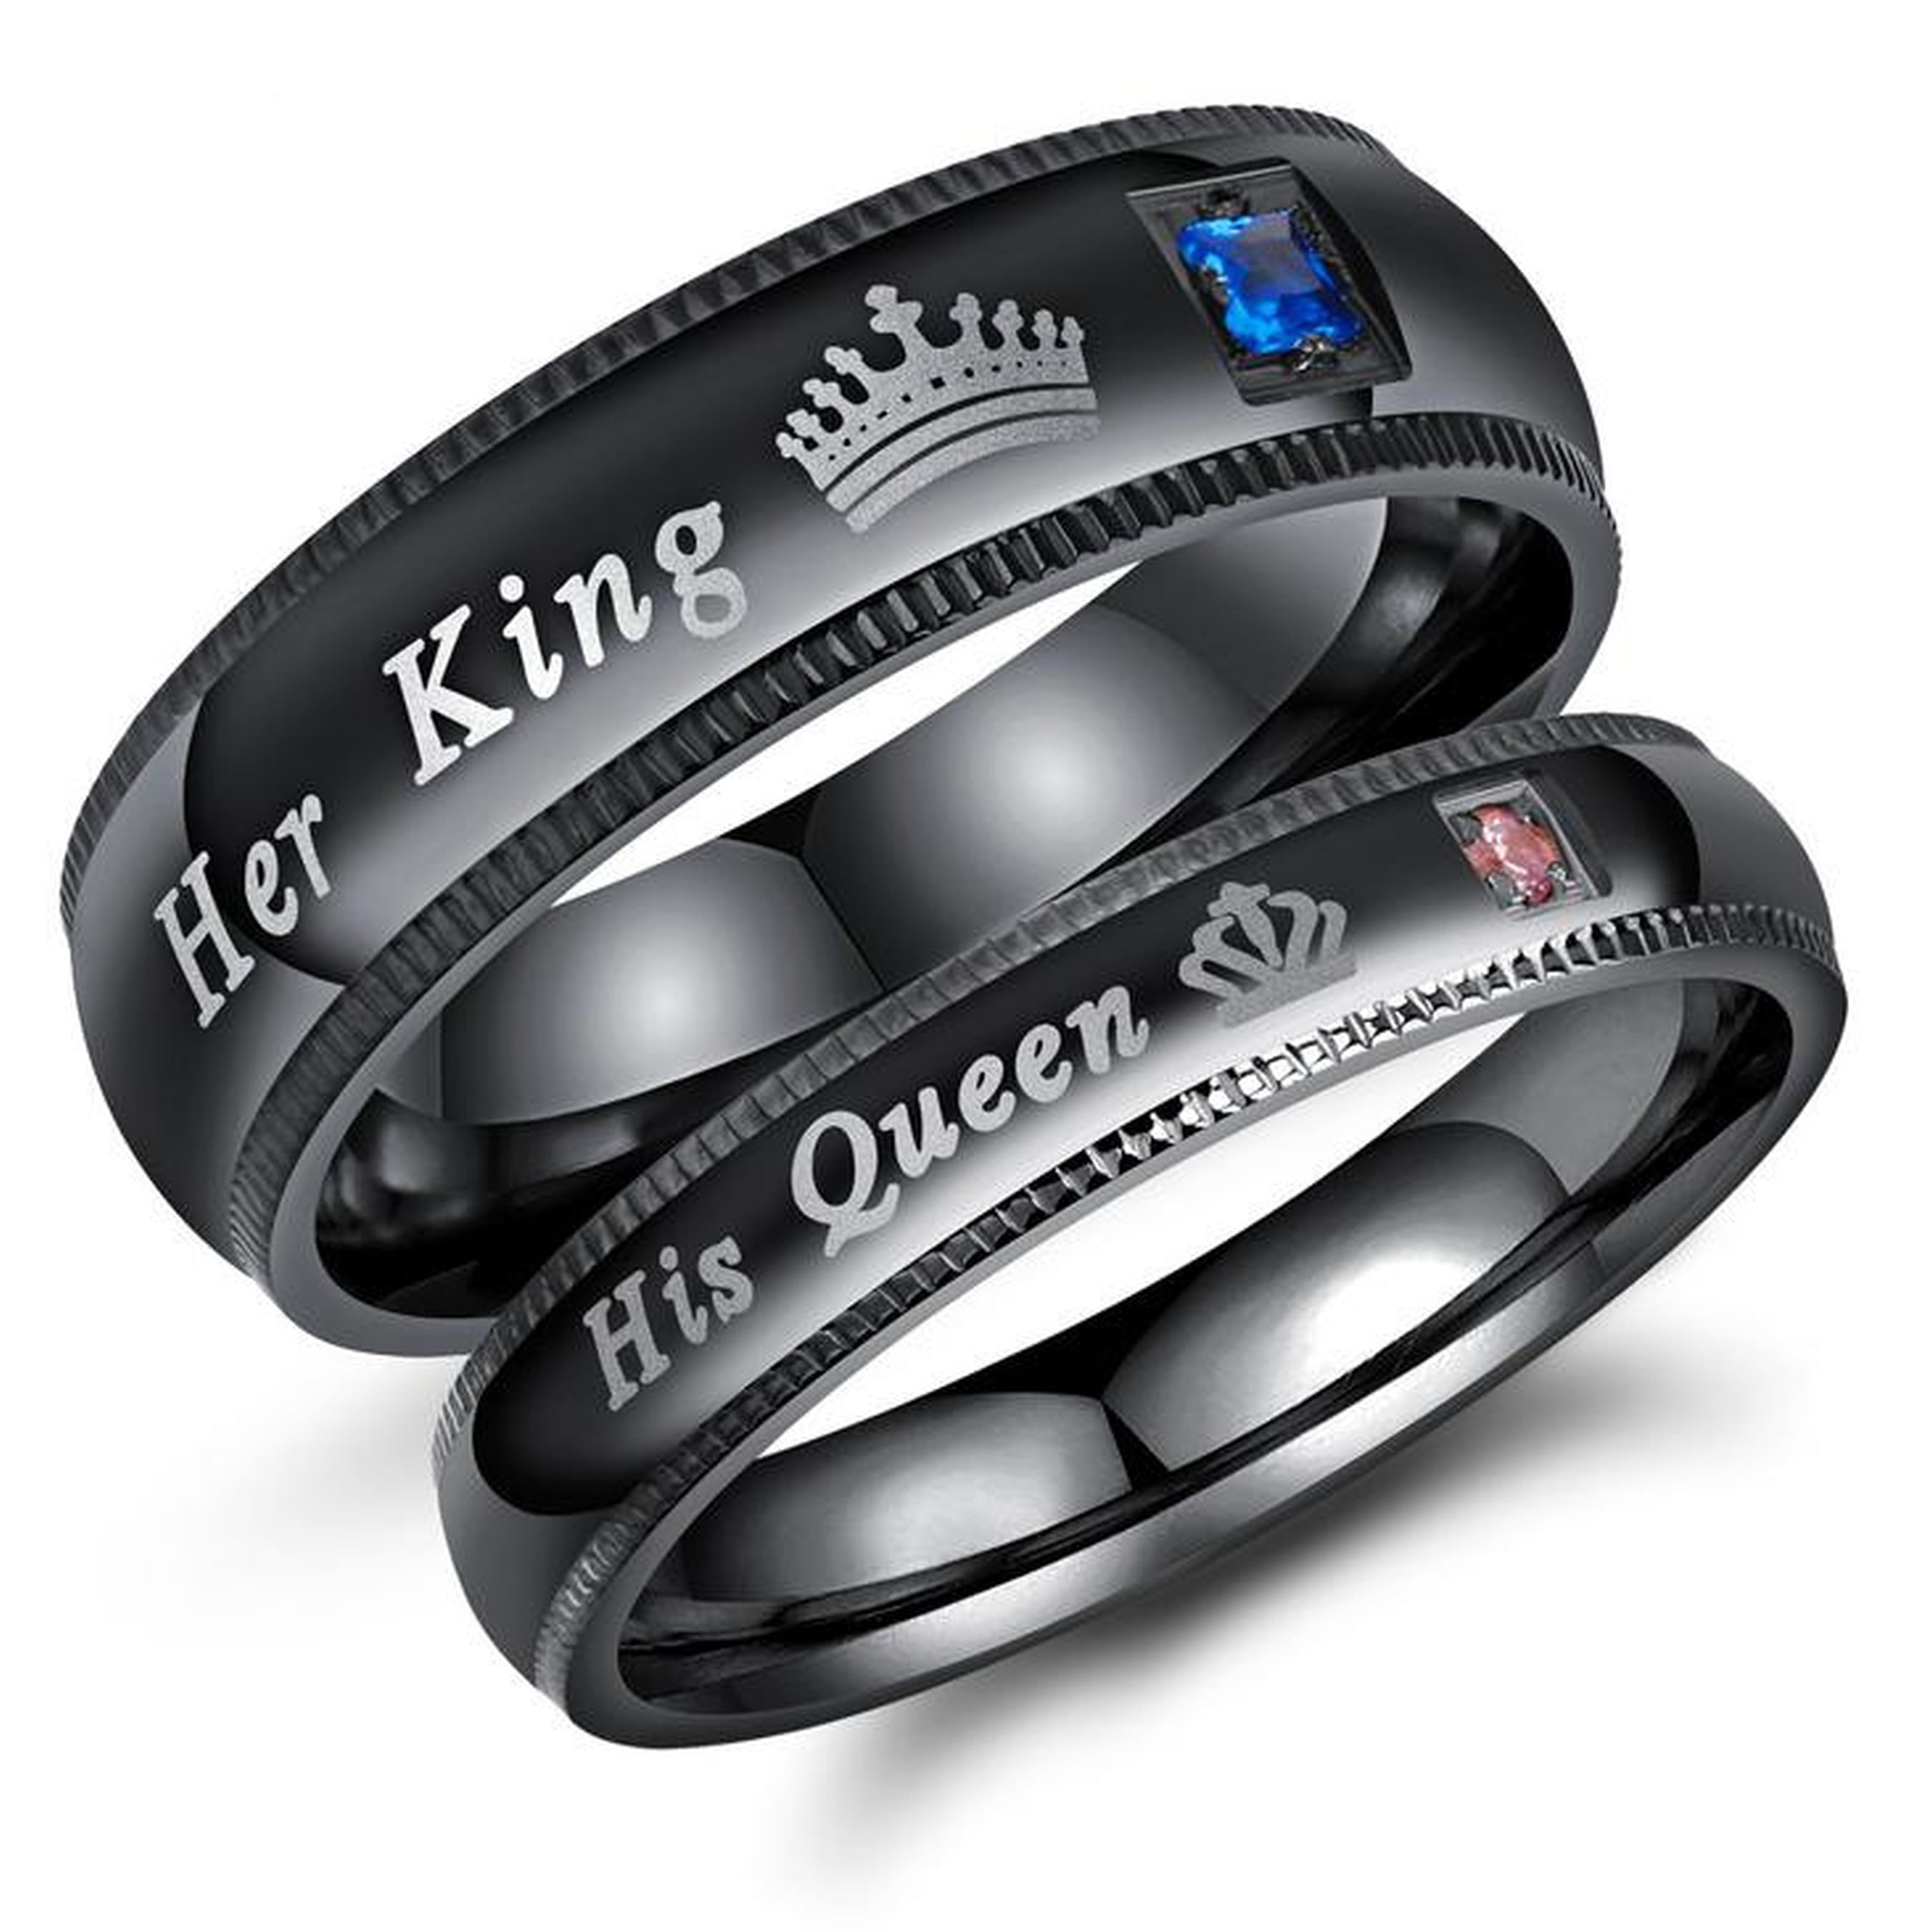 Danser embargo Vertrouwen Couple's Matching Promise Ring "His Queen" or "Her King", His or Her  Matching Wedding Band in Stainless Steel, for Men or Women, Milgrain Edge,  Comfort Fit - Walmart.com